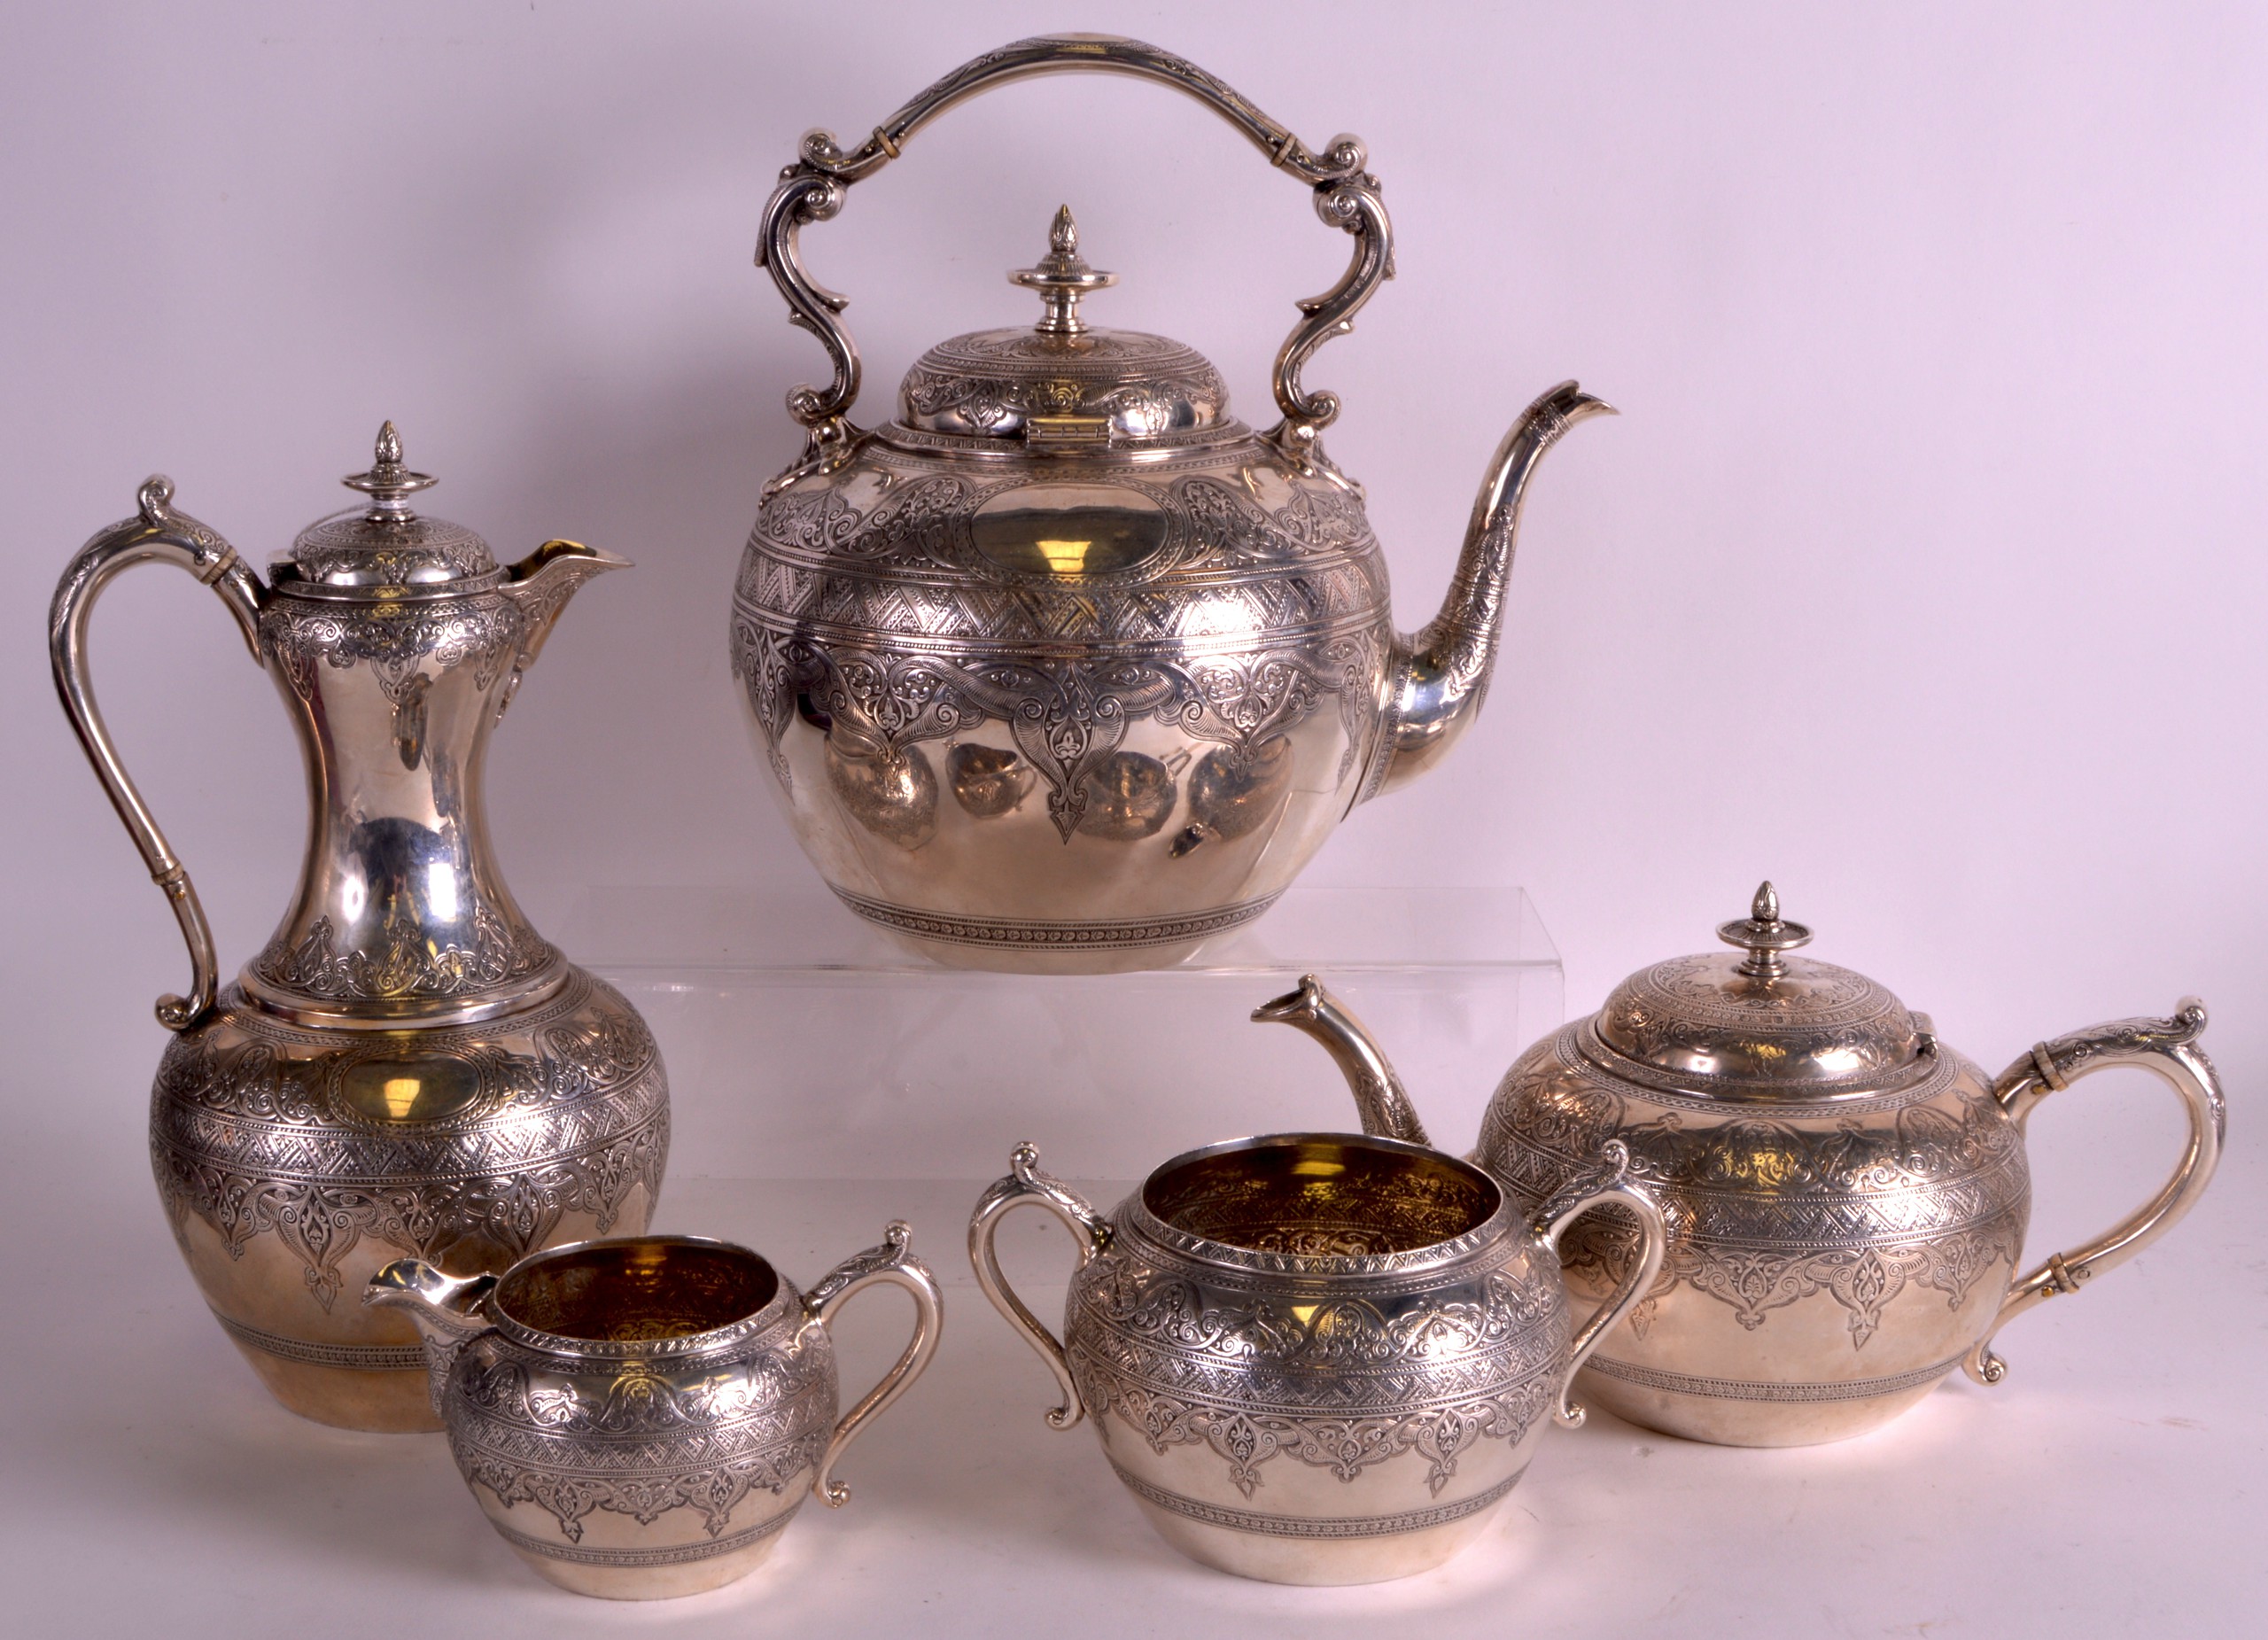 A FINE 19TH CENTURY SCOTTISH SILVER FIVE PIECE TEASERVICE finely decorated all over with incised